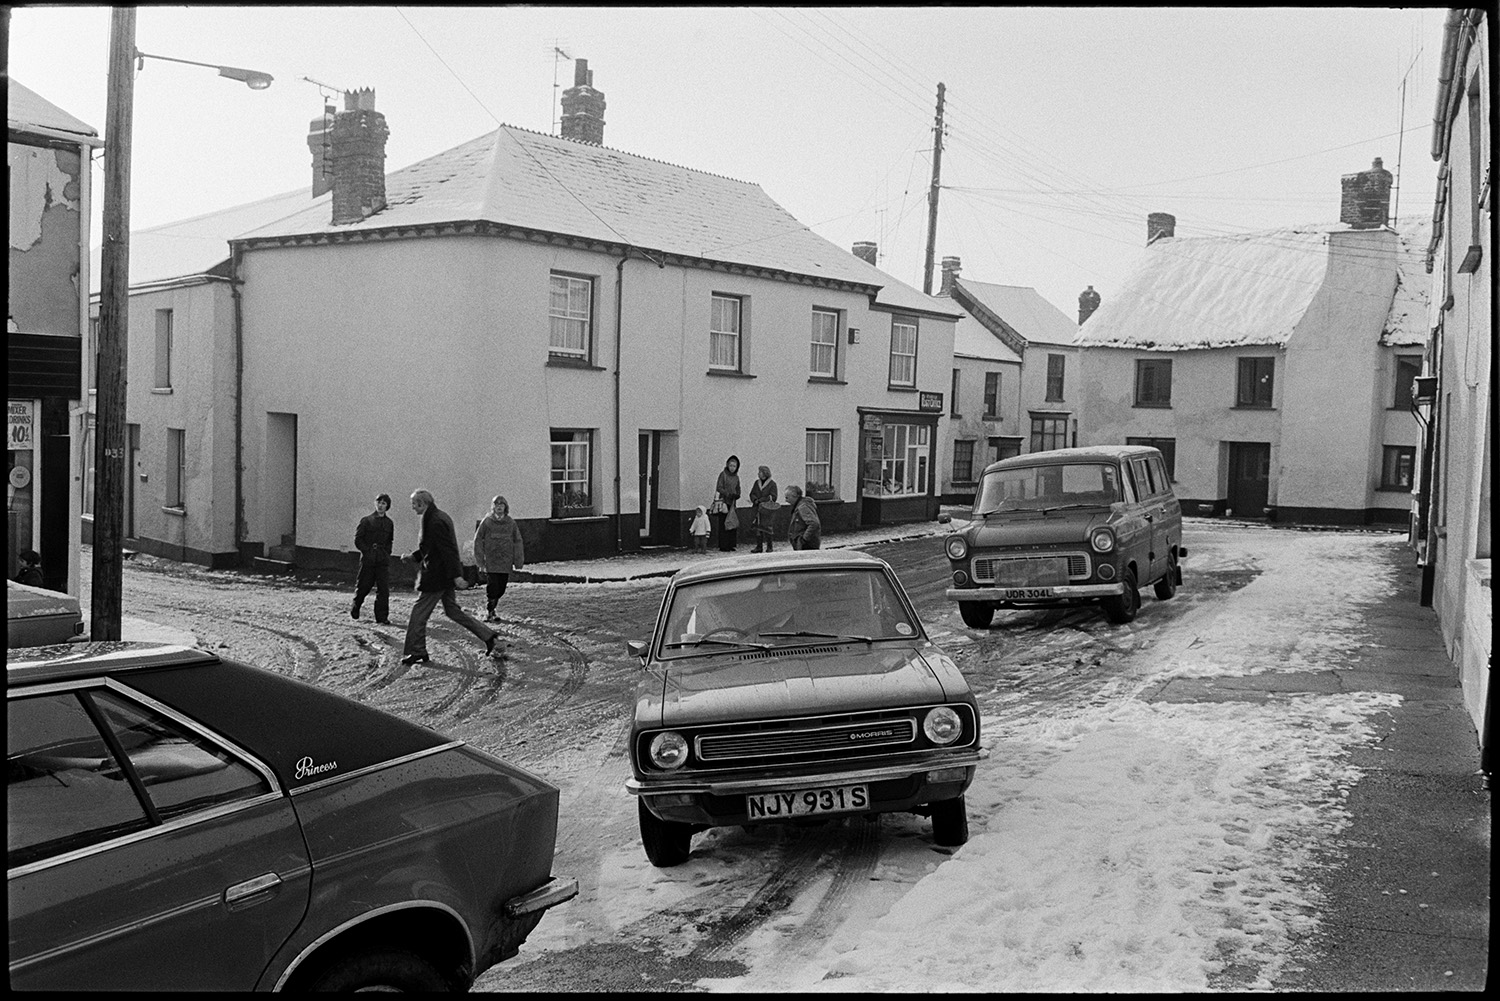 Street scene with cars in snow. 
[Cars and a van parked on a snow covered street in Winkleigh. People are walking along the street and the shop front of Winkleigh Post Office is visible in the background.]